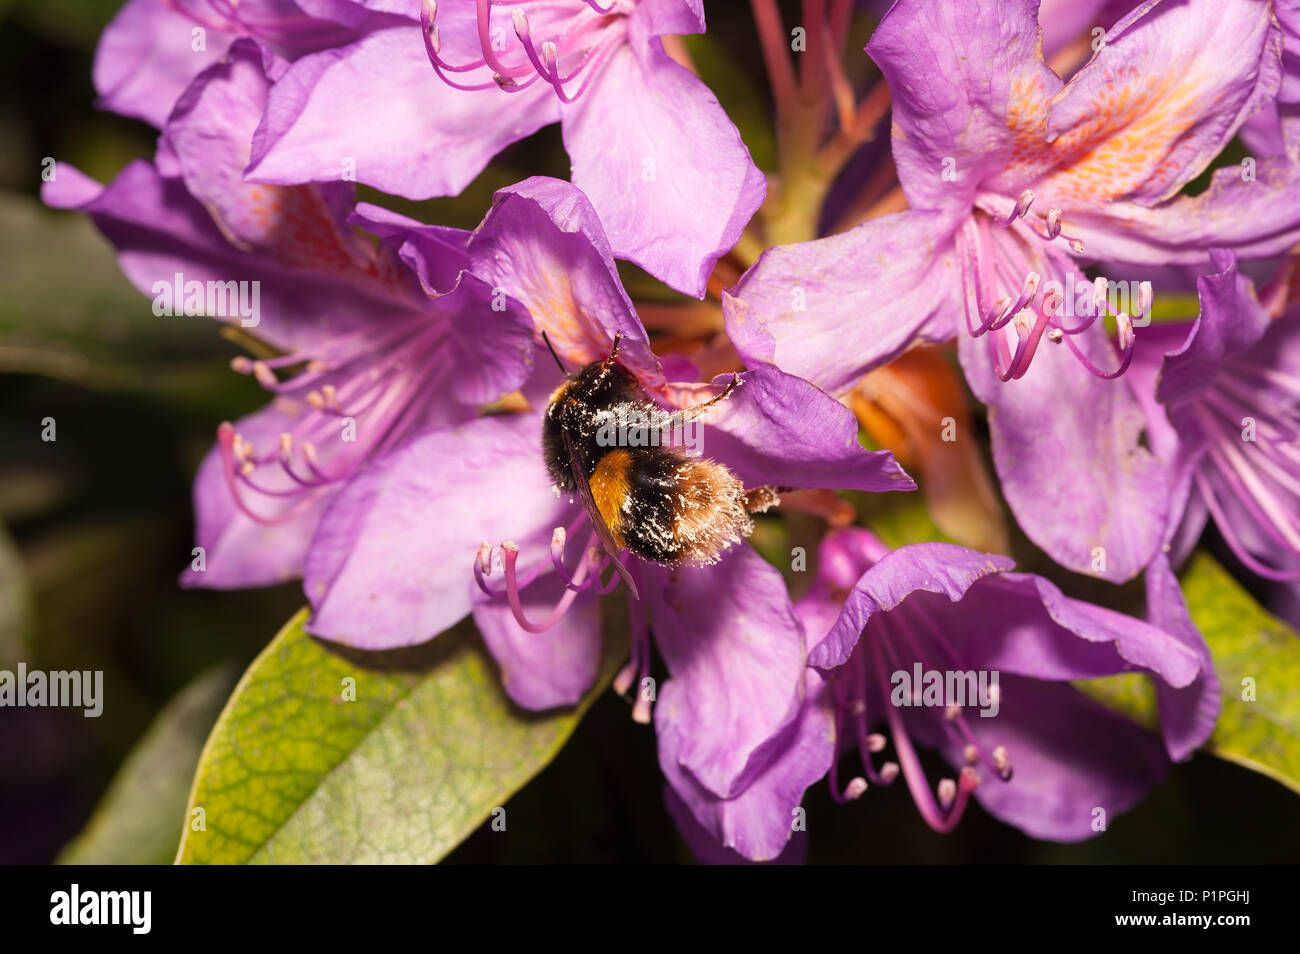 A feeding frenzy feeding on wild Rhododendron flowers has left bumblebees coated in pollen all over adhering to fine hairs on body Bombus hortorum Stock Photo